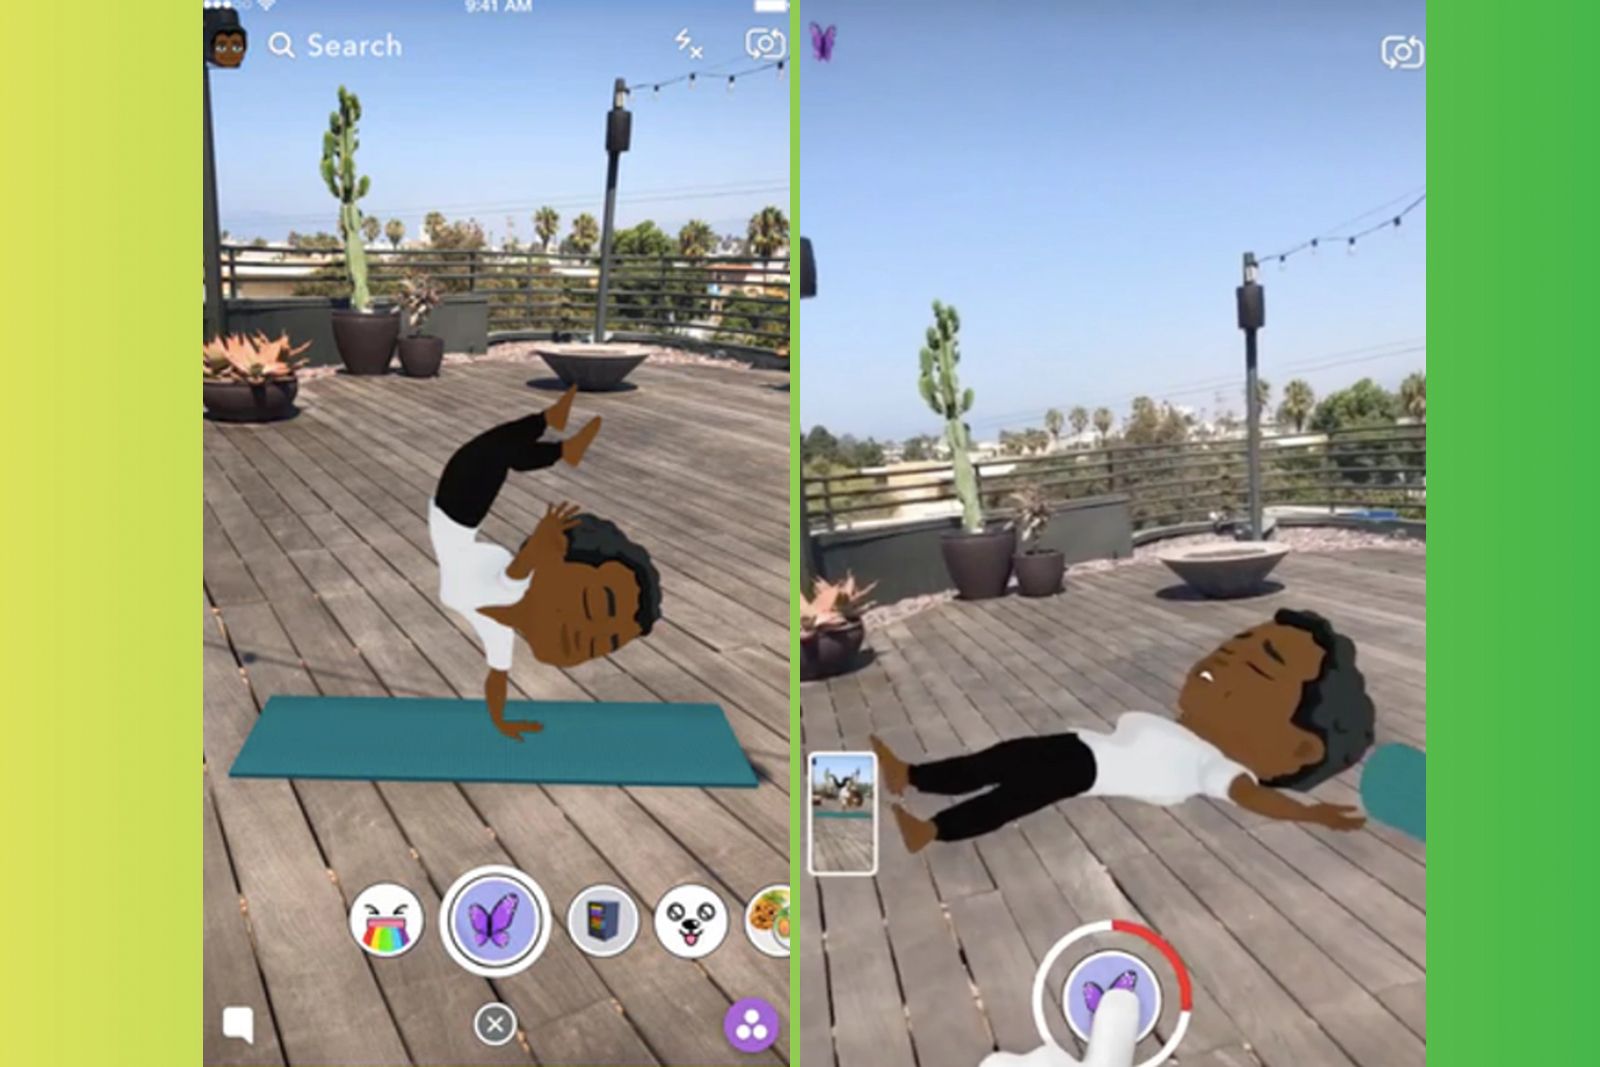 Snapchat How to add 3D animated Bitmoji lenses to your snaps image 1